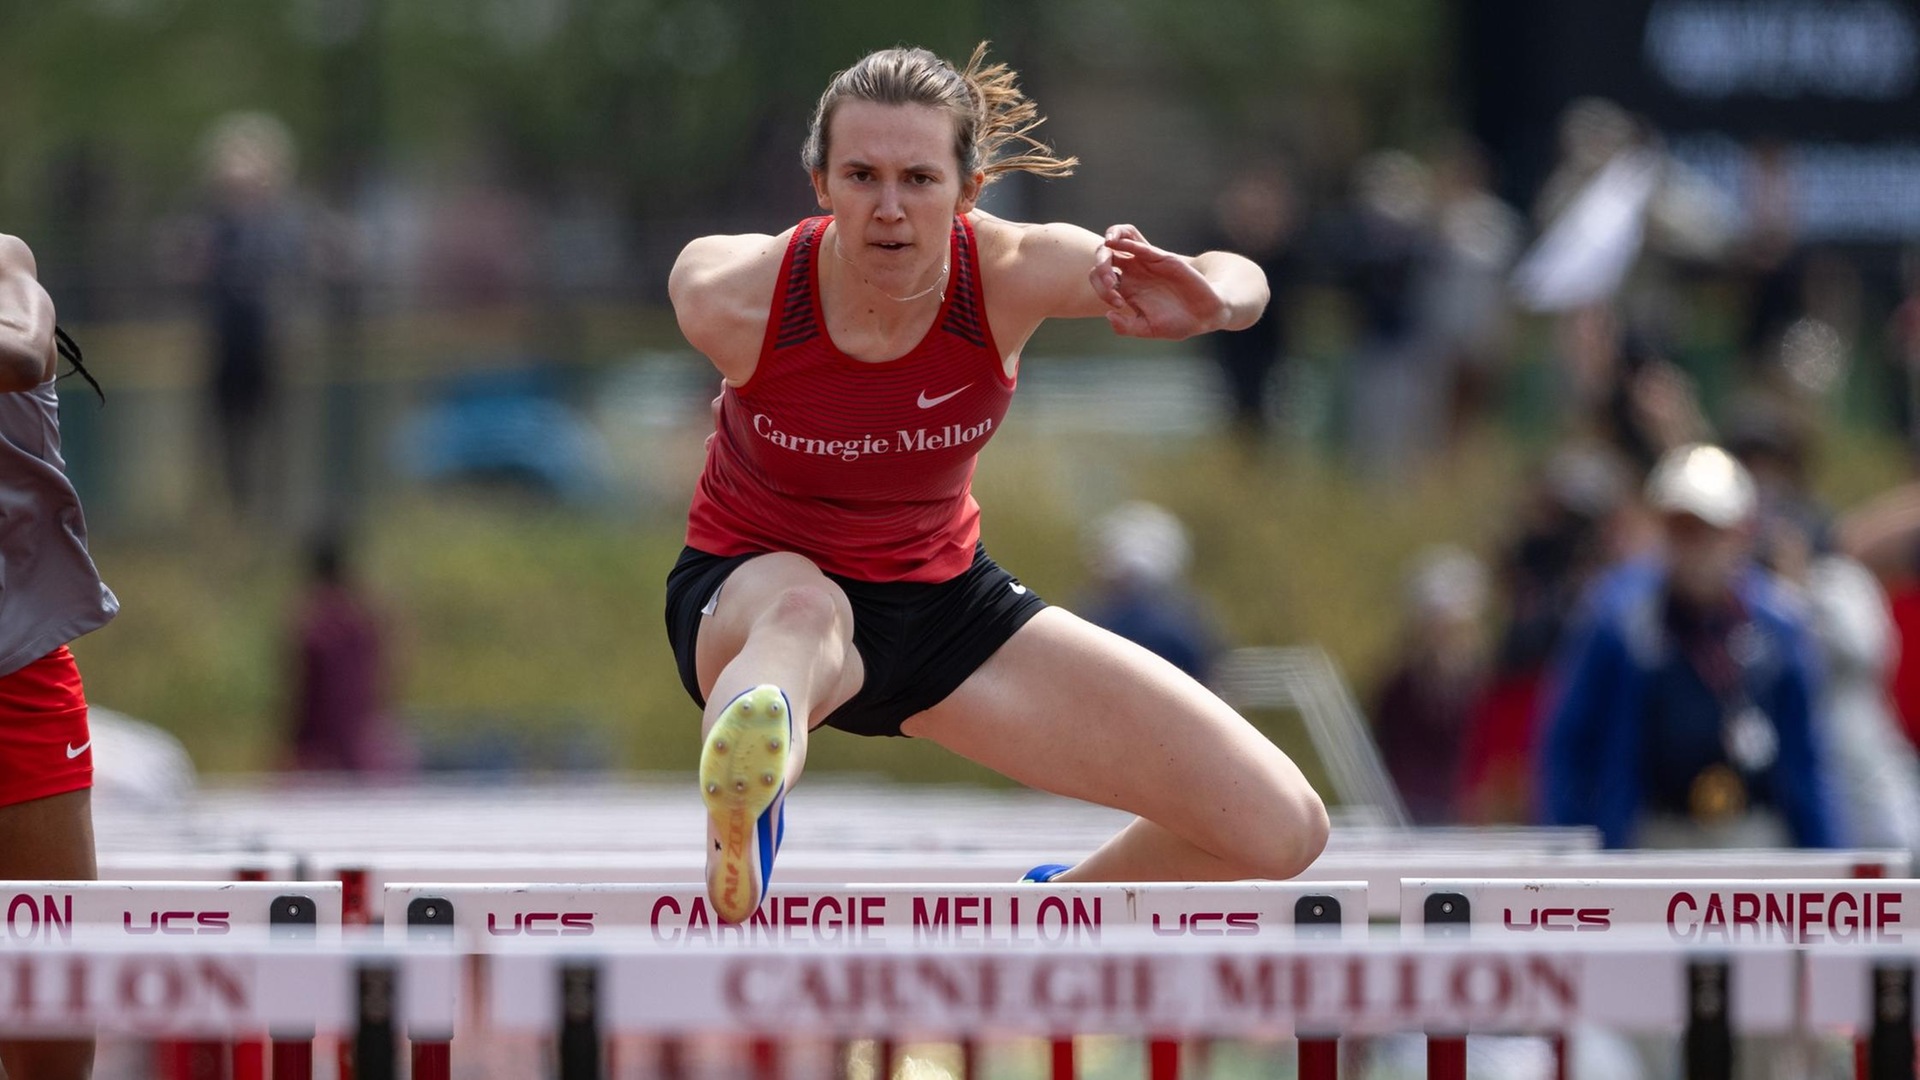 Barre in Second After Four Events of Heptathlon at NCAA Outdoor Track and Field Championships